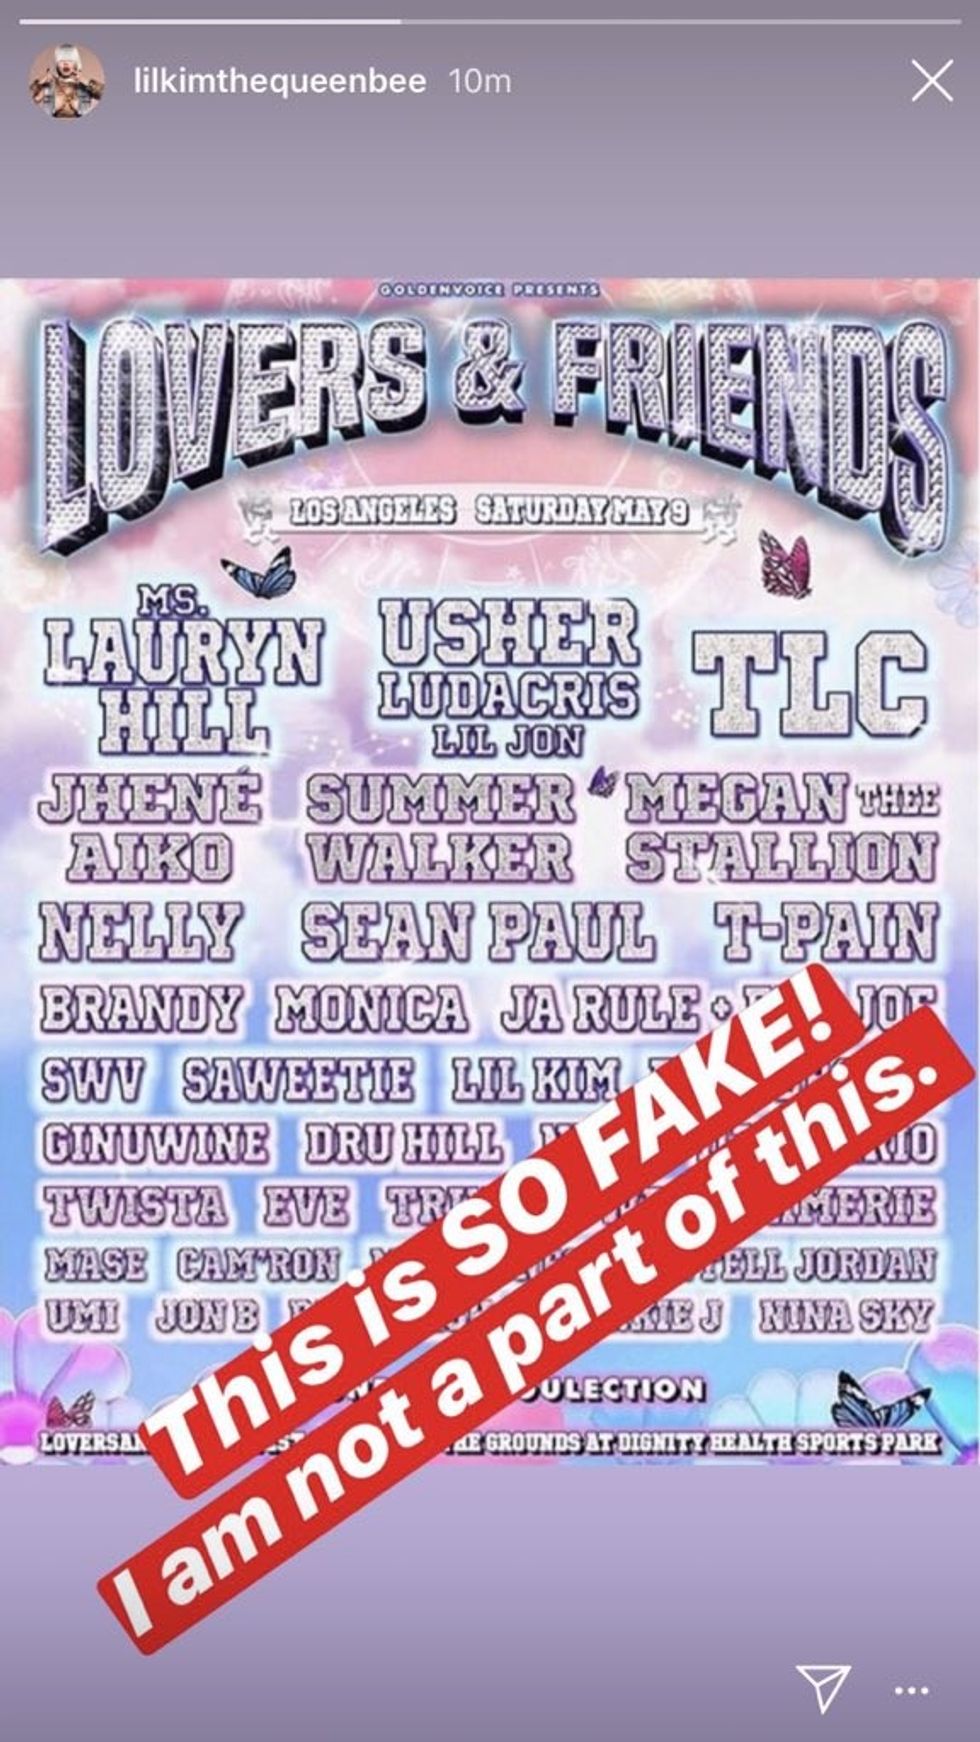 The Lovers & Friends Festival Has Been Pushed Back Due to the